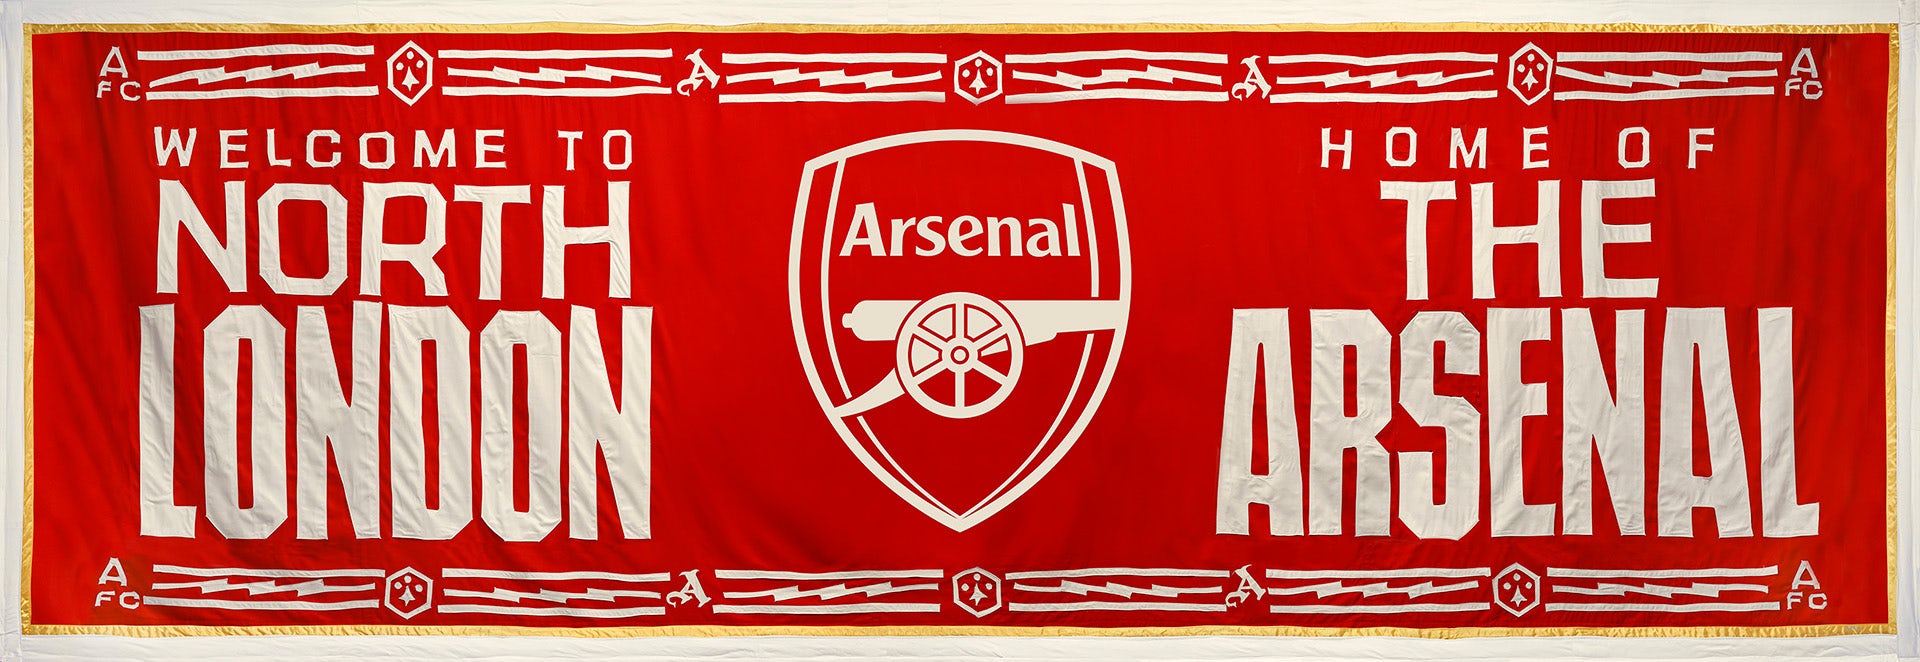 Image shows an Arsenal banner by Jeremy Deller featuring the club's cannon crest in the centre. The banner reads 'Welcome to North London' and 'Home of the Arsenal' on a red background